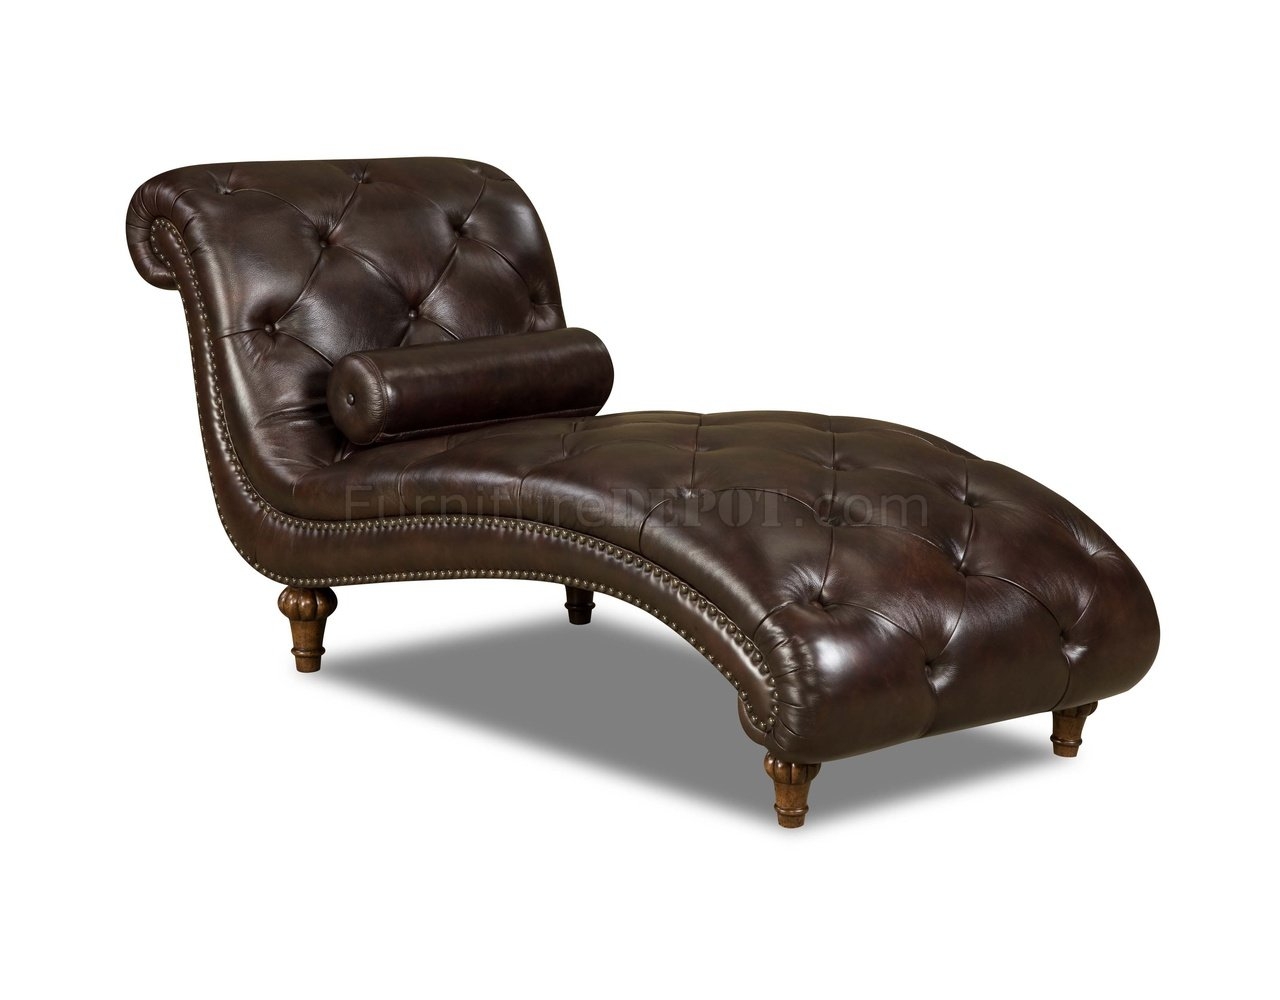 Leather chaise lounge chairs 23